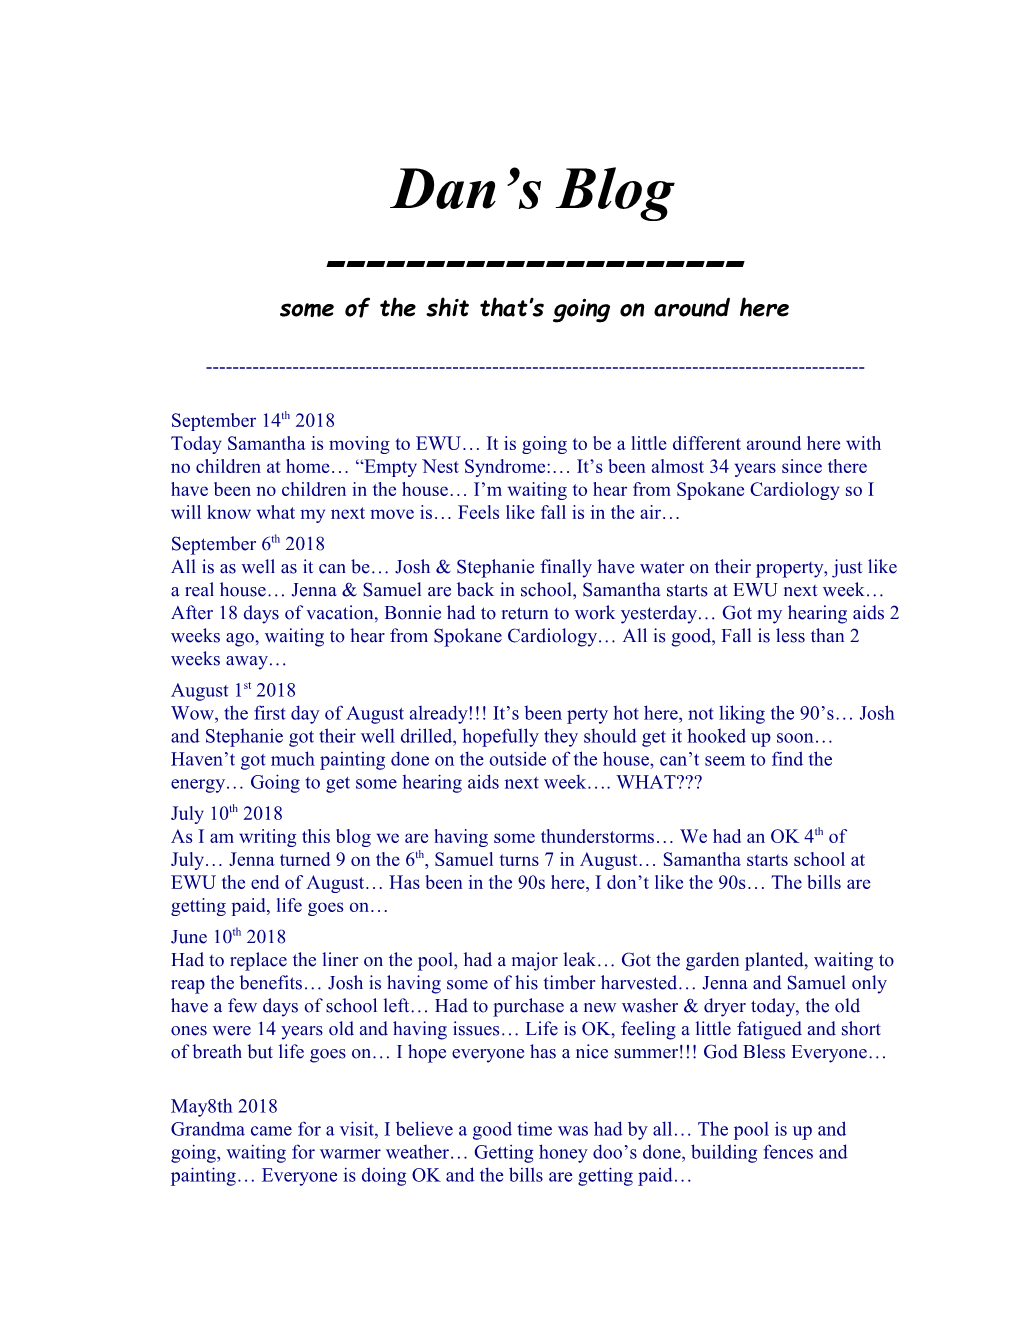 Dan S Blog Some of the Shit That S Going on Around Here